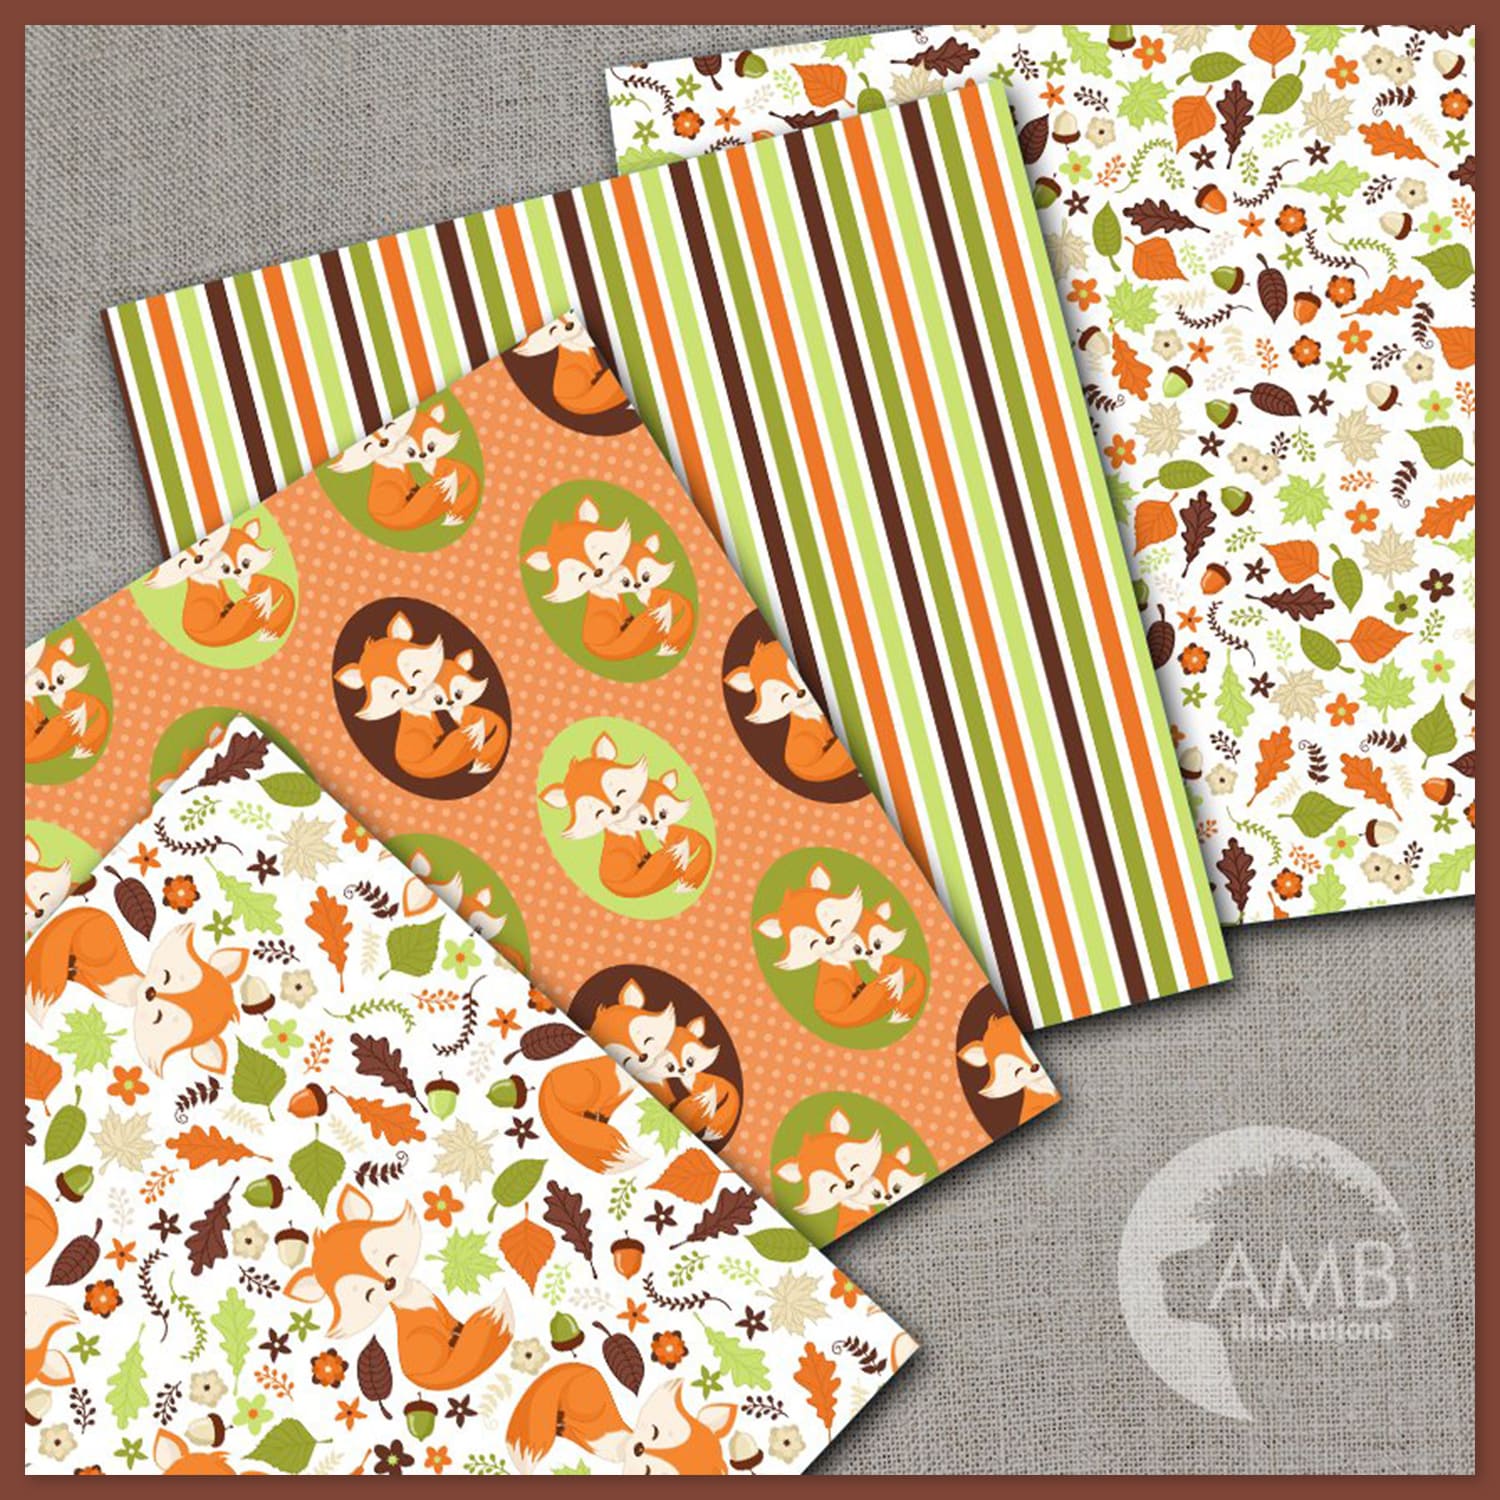 Fox Digital Paper and Clipart cover.